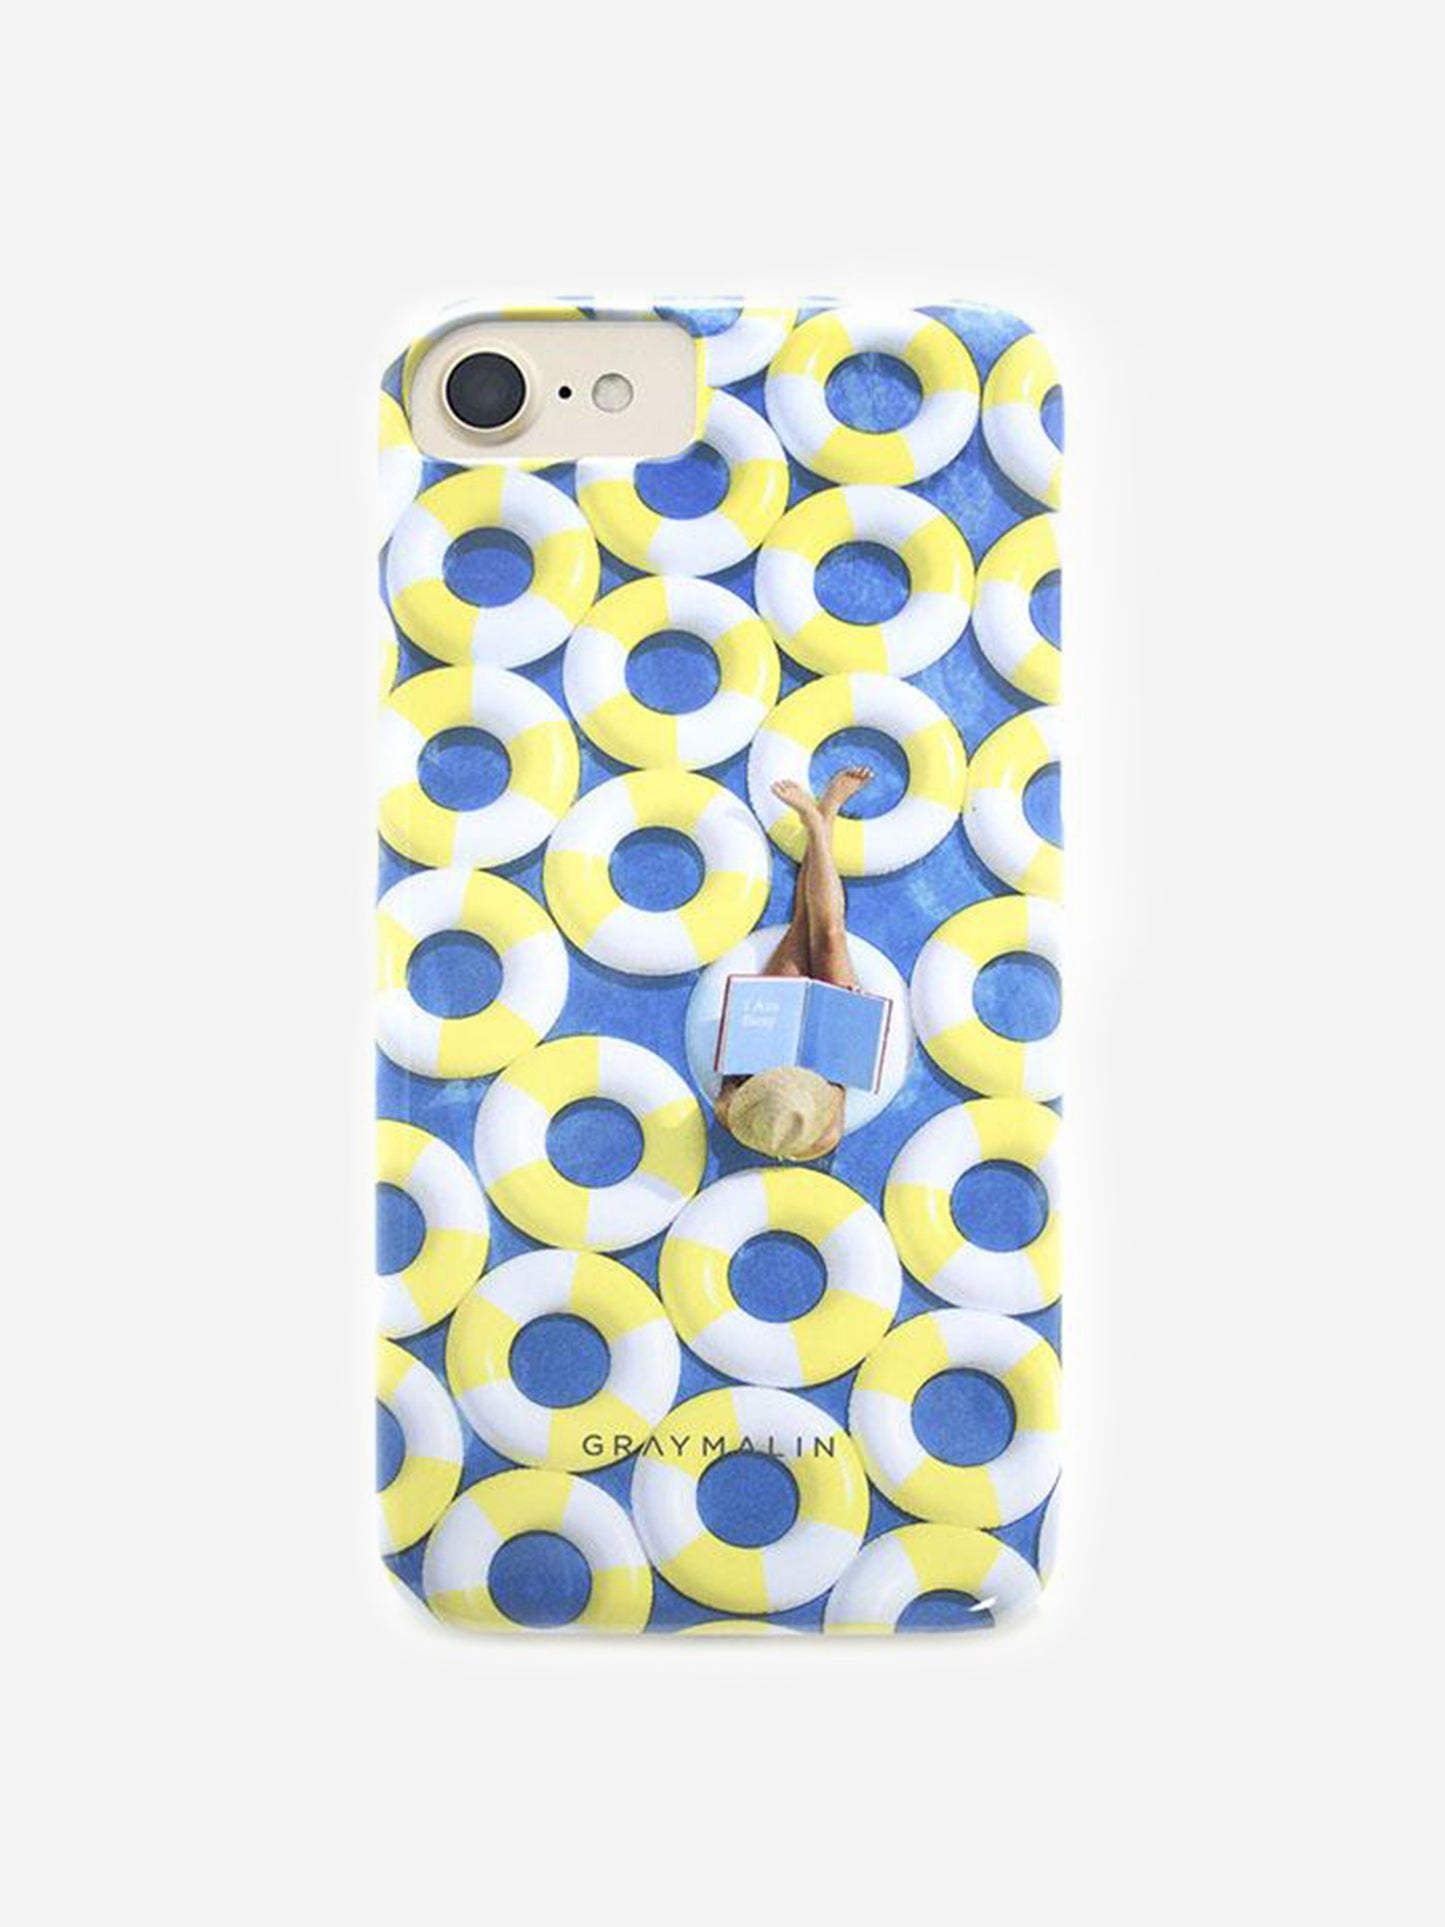 Gray Malin Out of the Office iPhone 7 Case